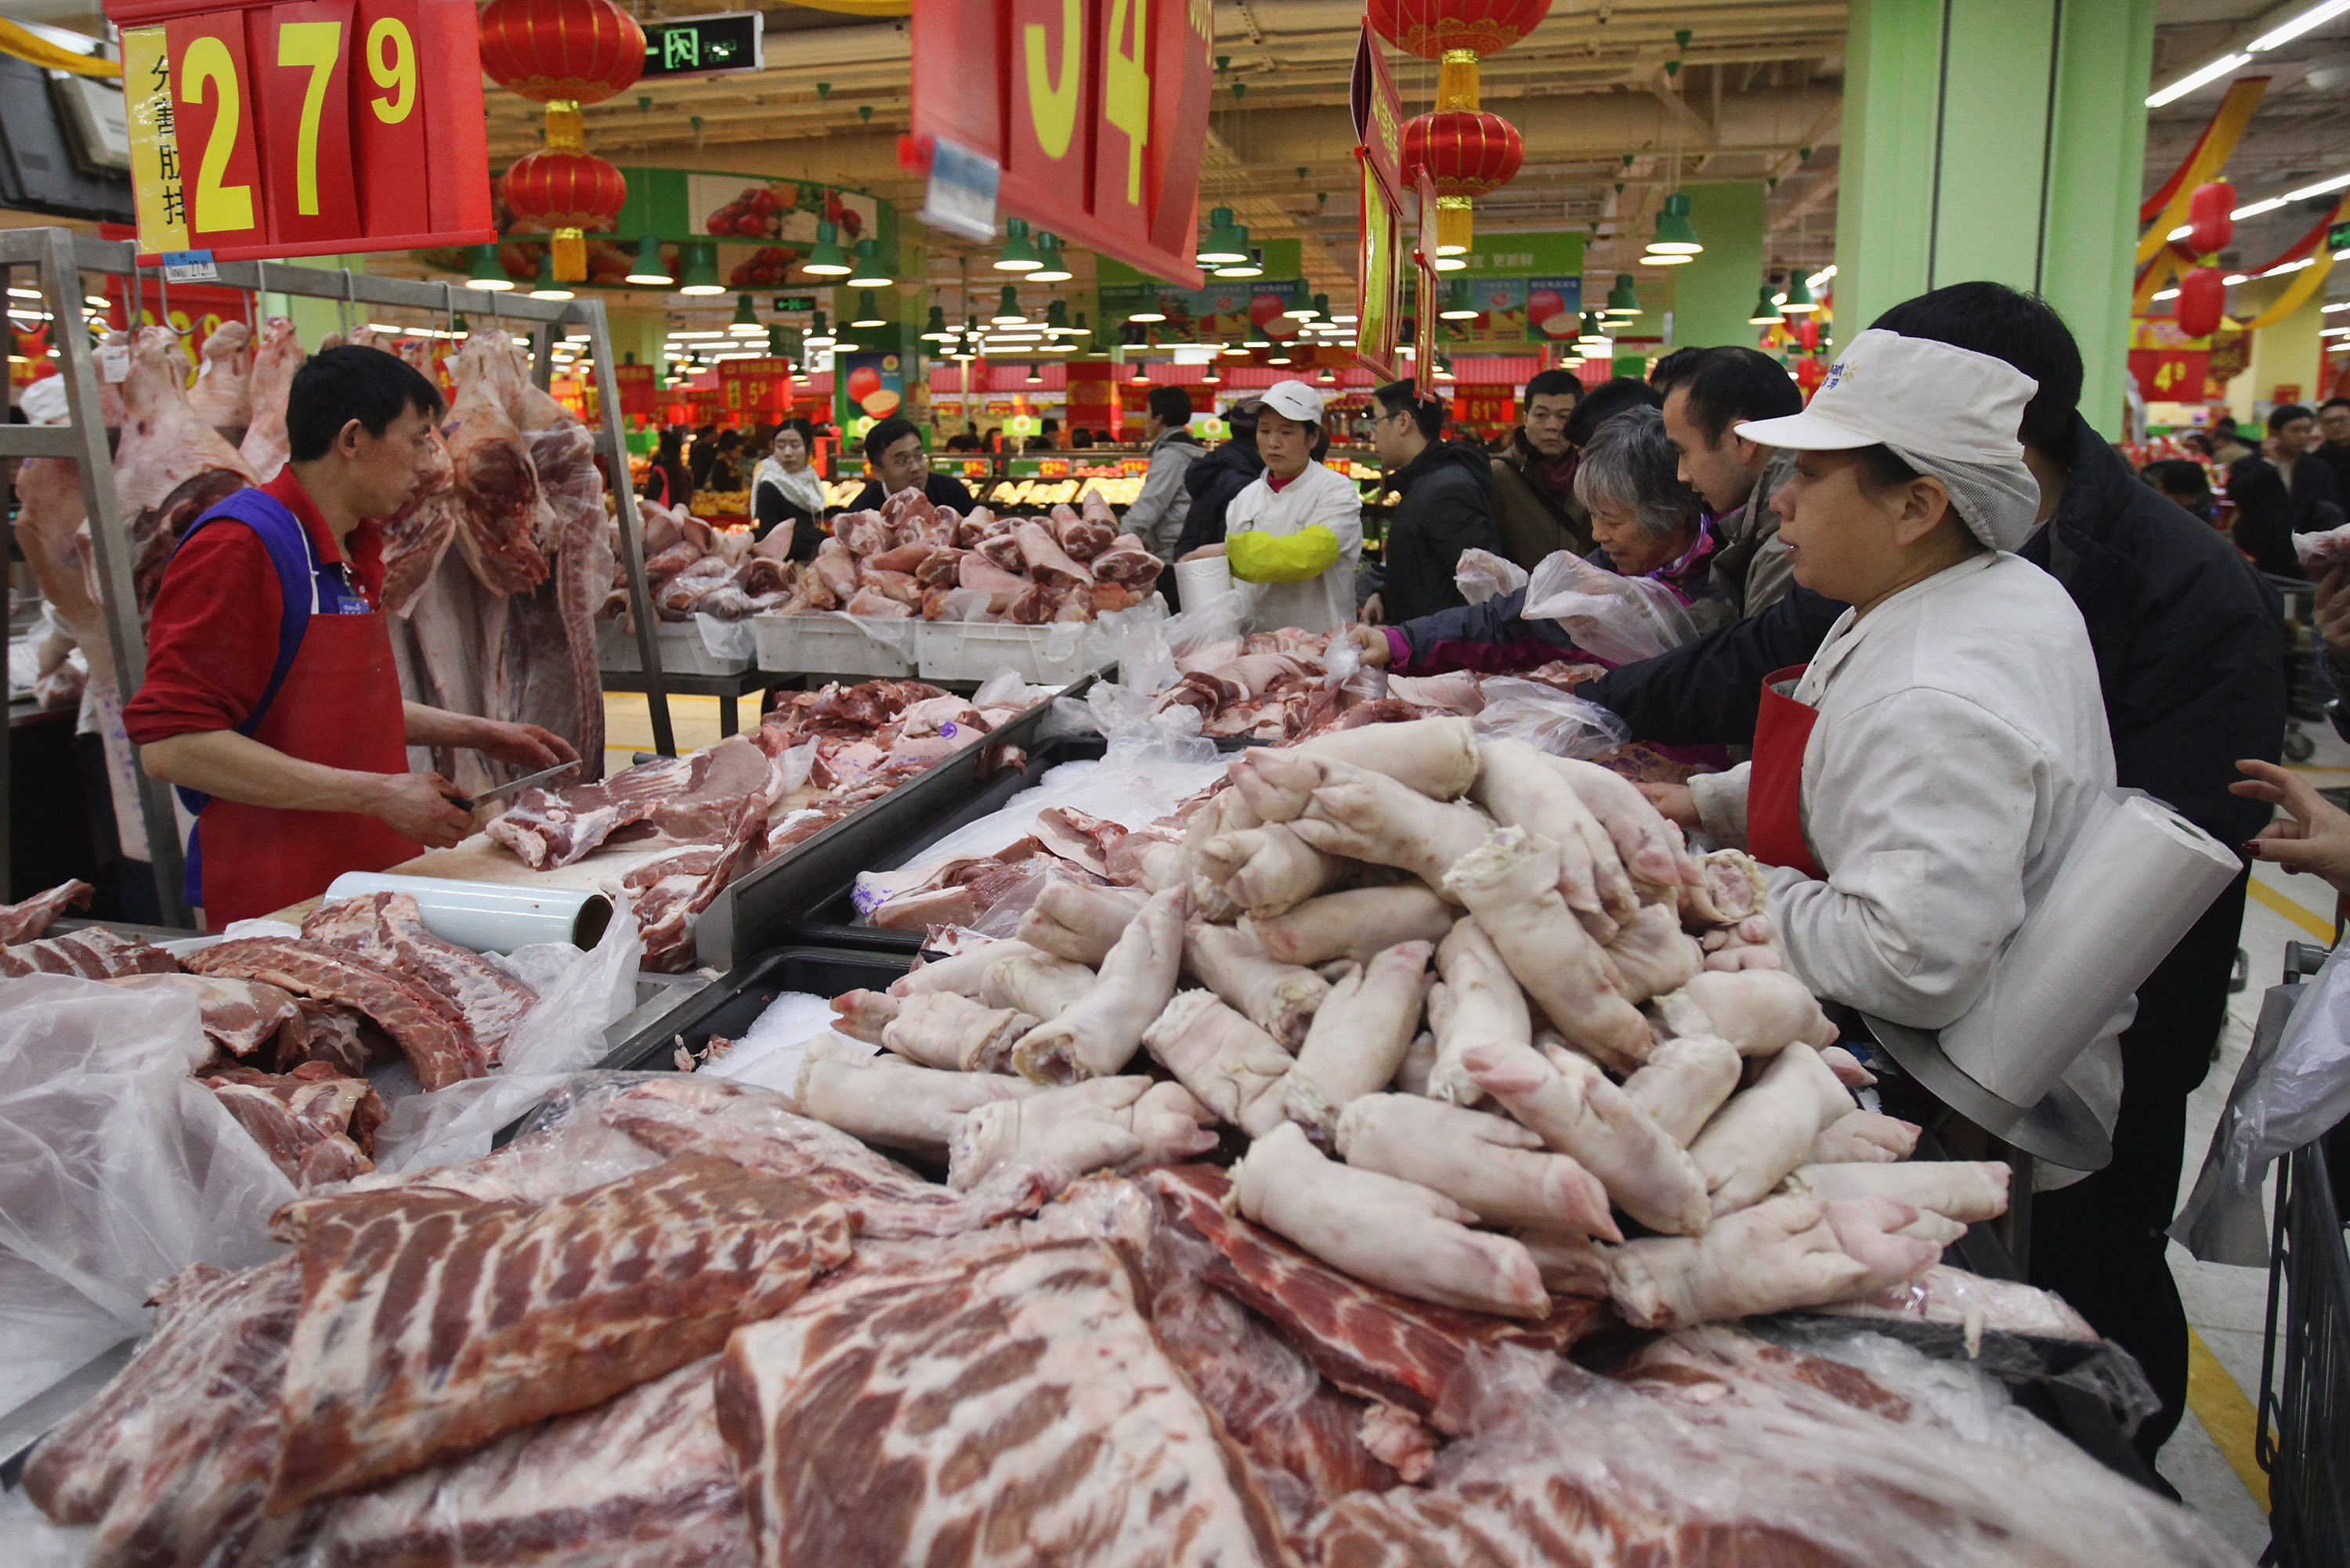 Chinese people buy pork for the Lunar New Year's Eve dinner in a Wal-Mart neighborhood market on January 21, 2012 in Beijing, China. (Feng Li—Getty Images)